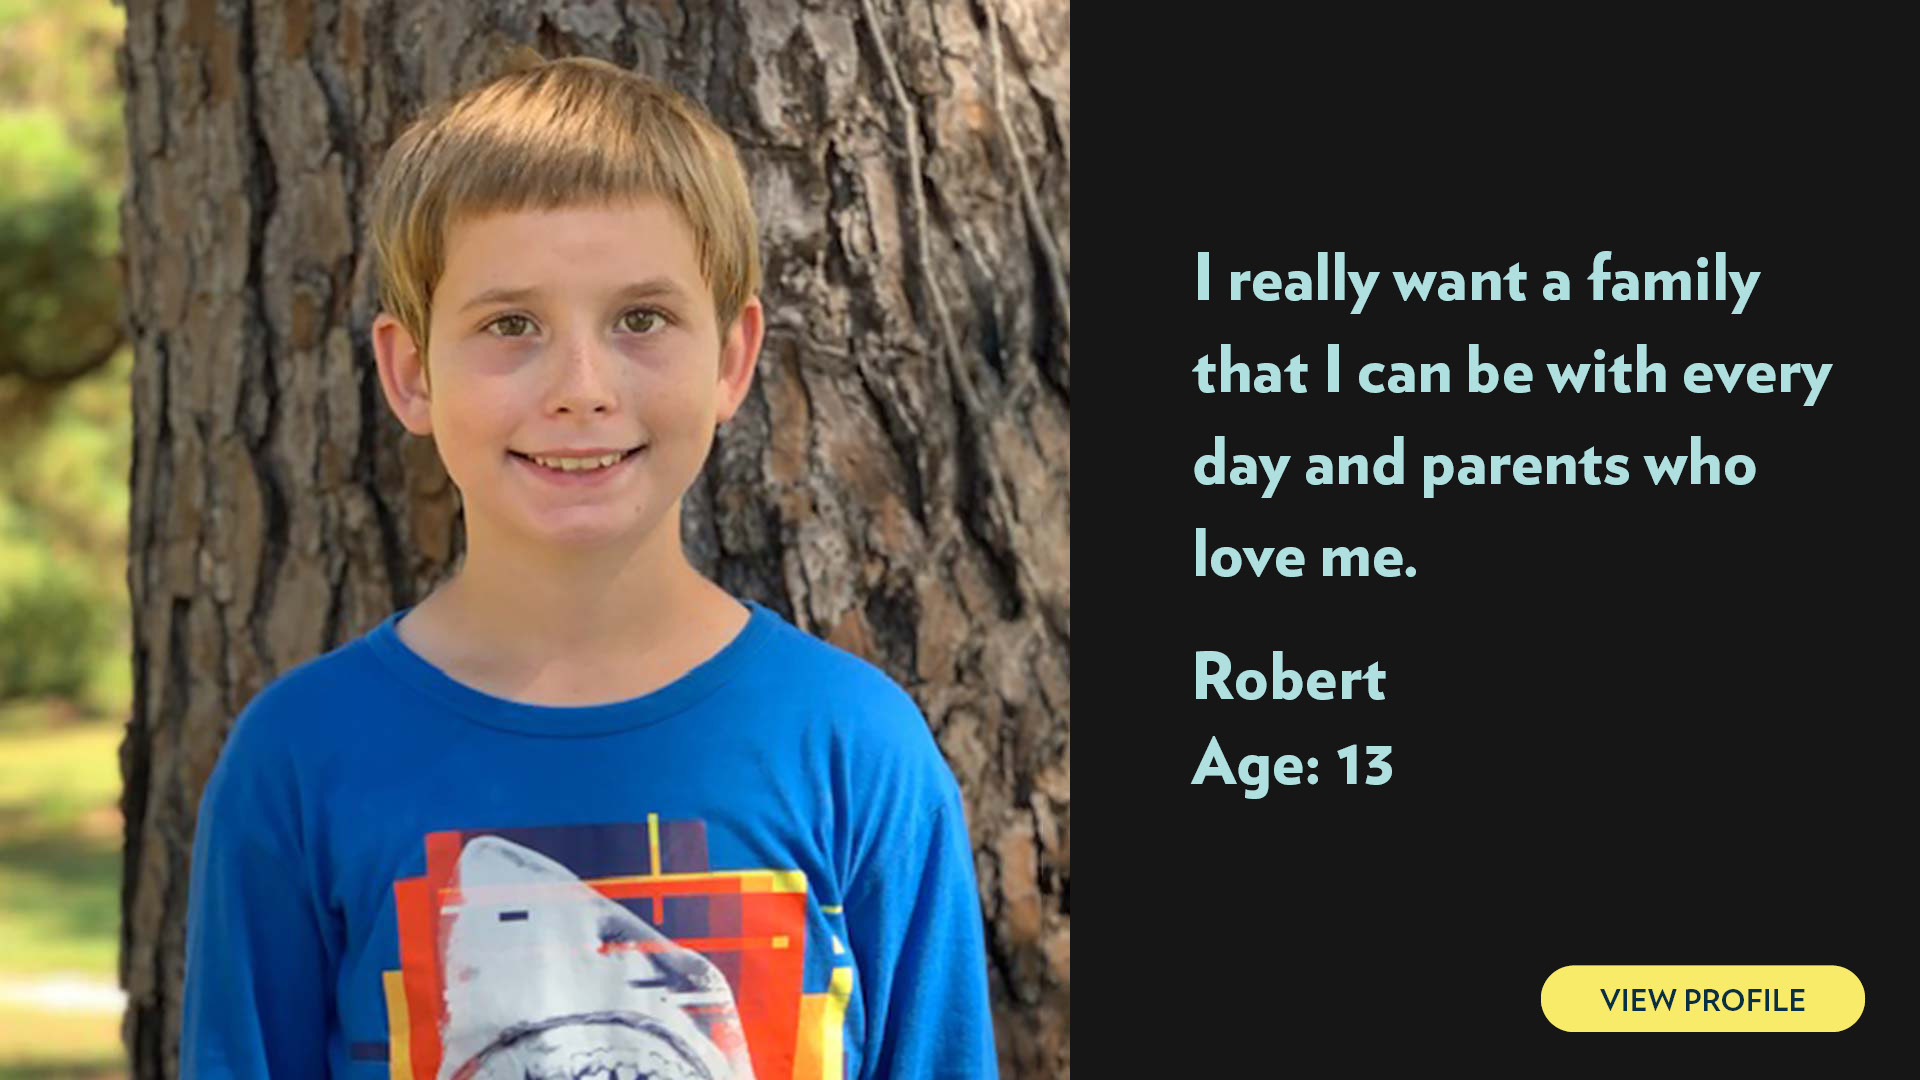 Robert, age 13. I really want a family that I can be with every day and parents who love me. View profile.